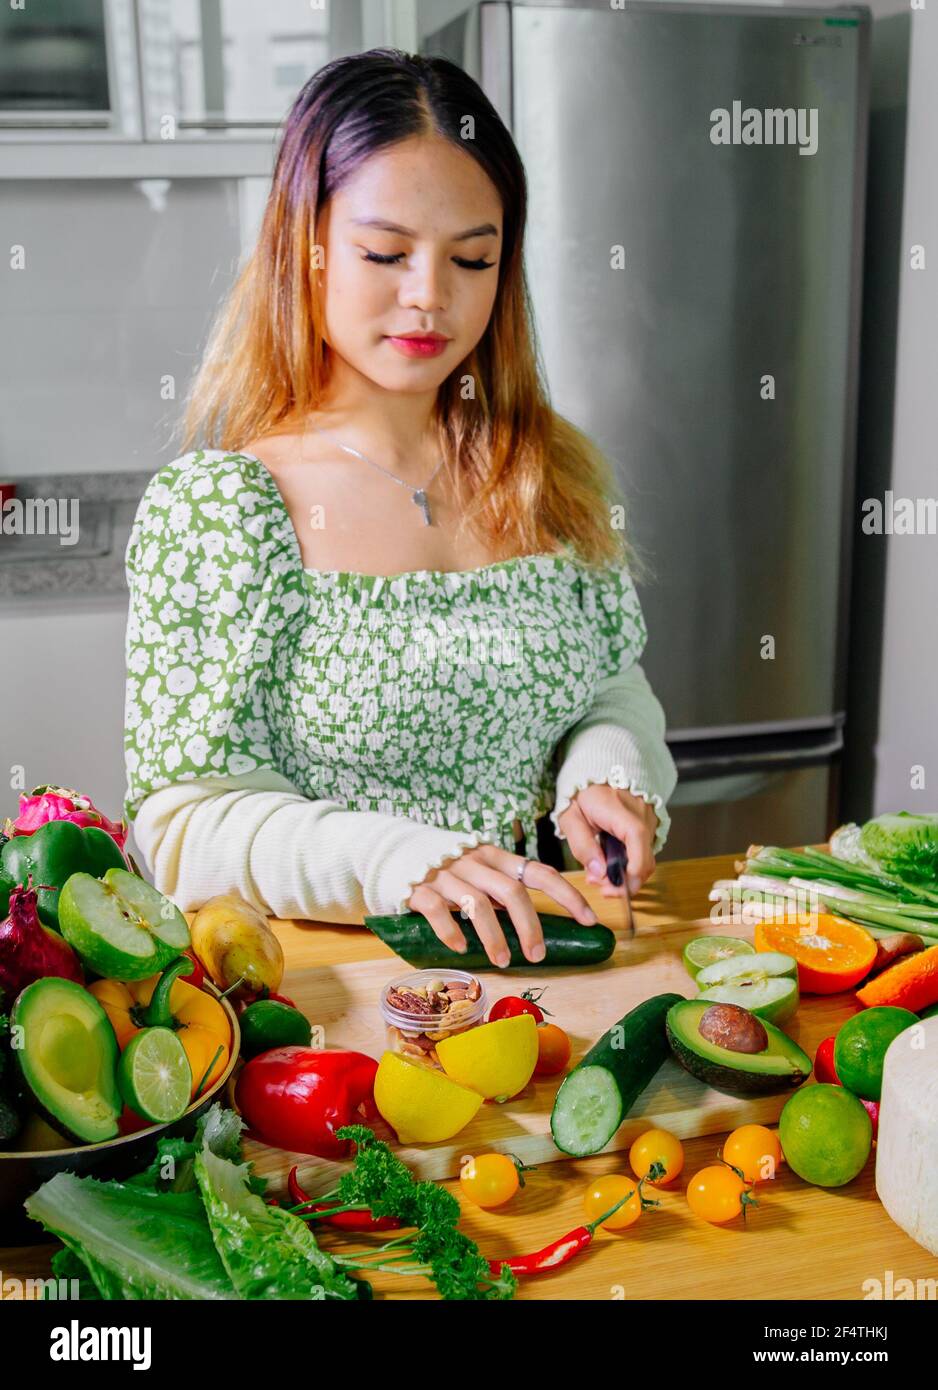 Asian girl cooking healthy vegetarian and vegan food, vegetables and fruits in the kitchen, healthy lifestyle Stock Photo